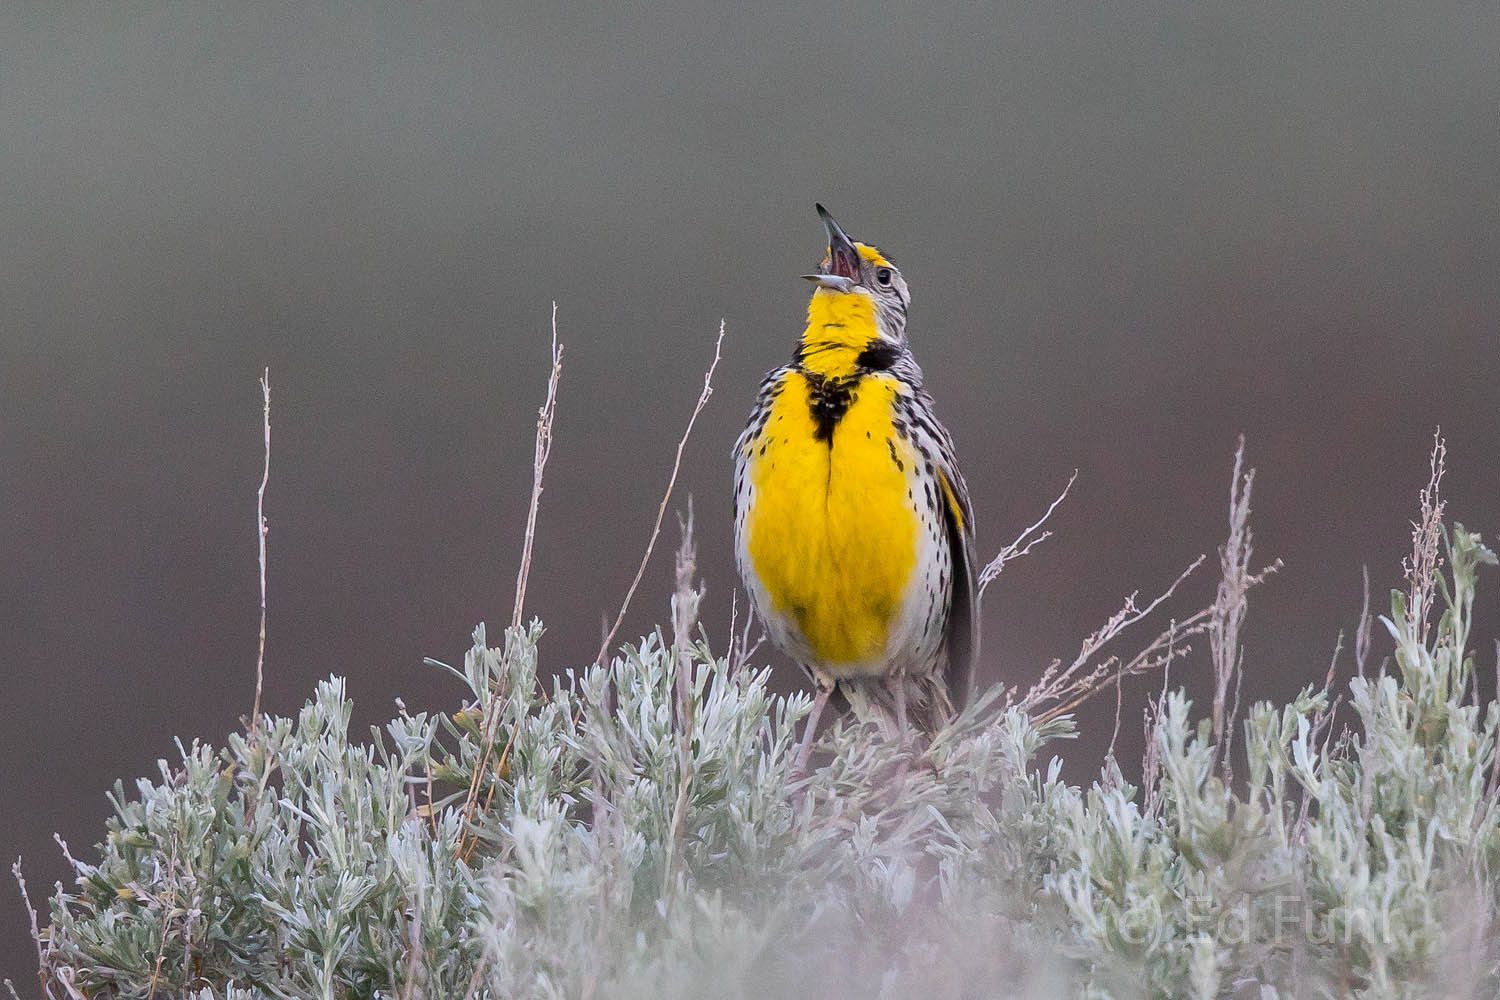 A meadowlark welcomes a new day.